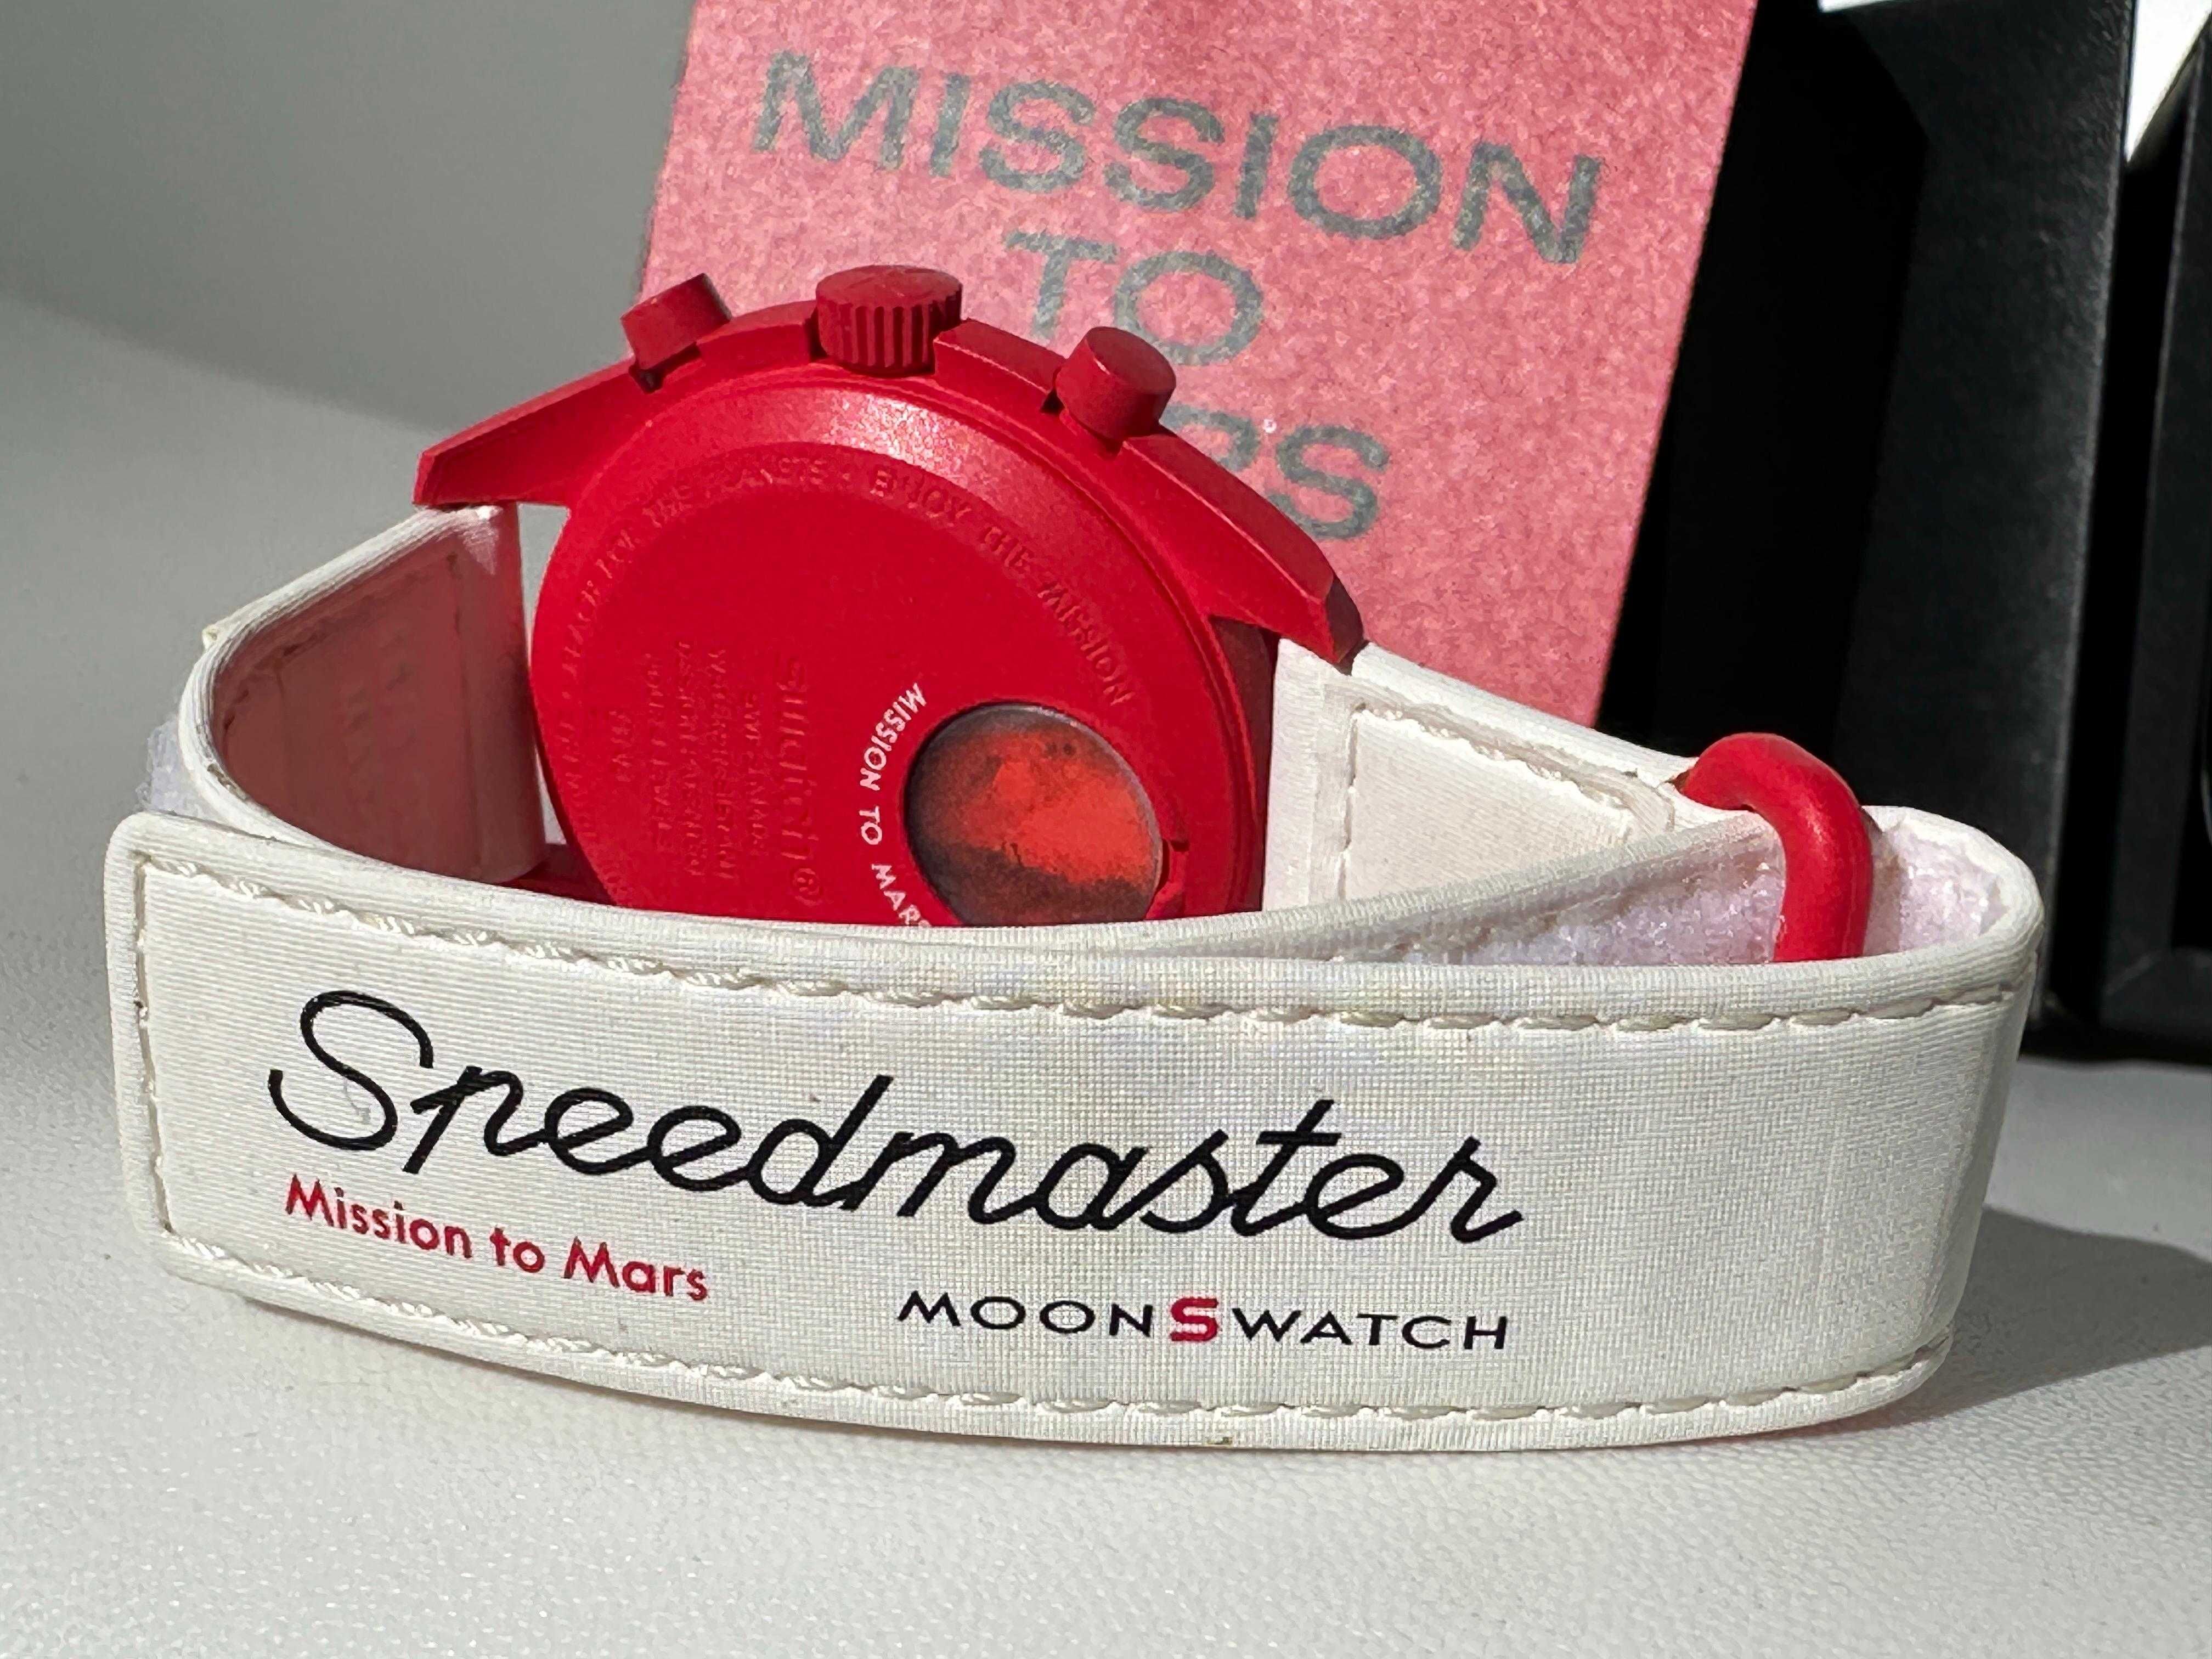 Omega x Swatch Moonswatch - mission to Mars